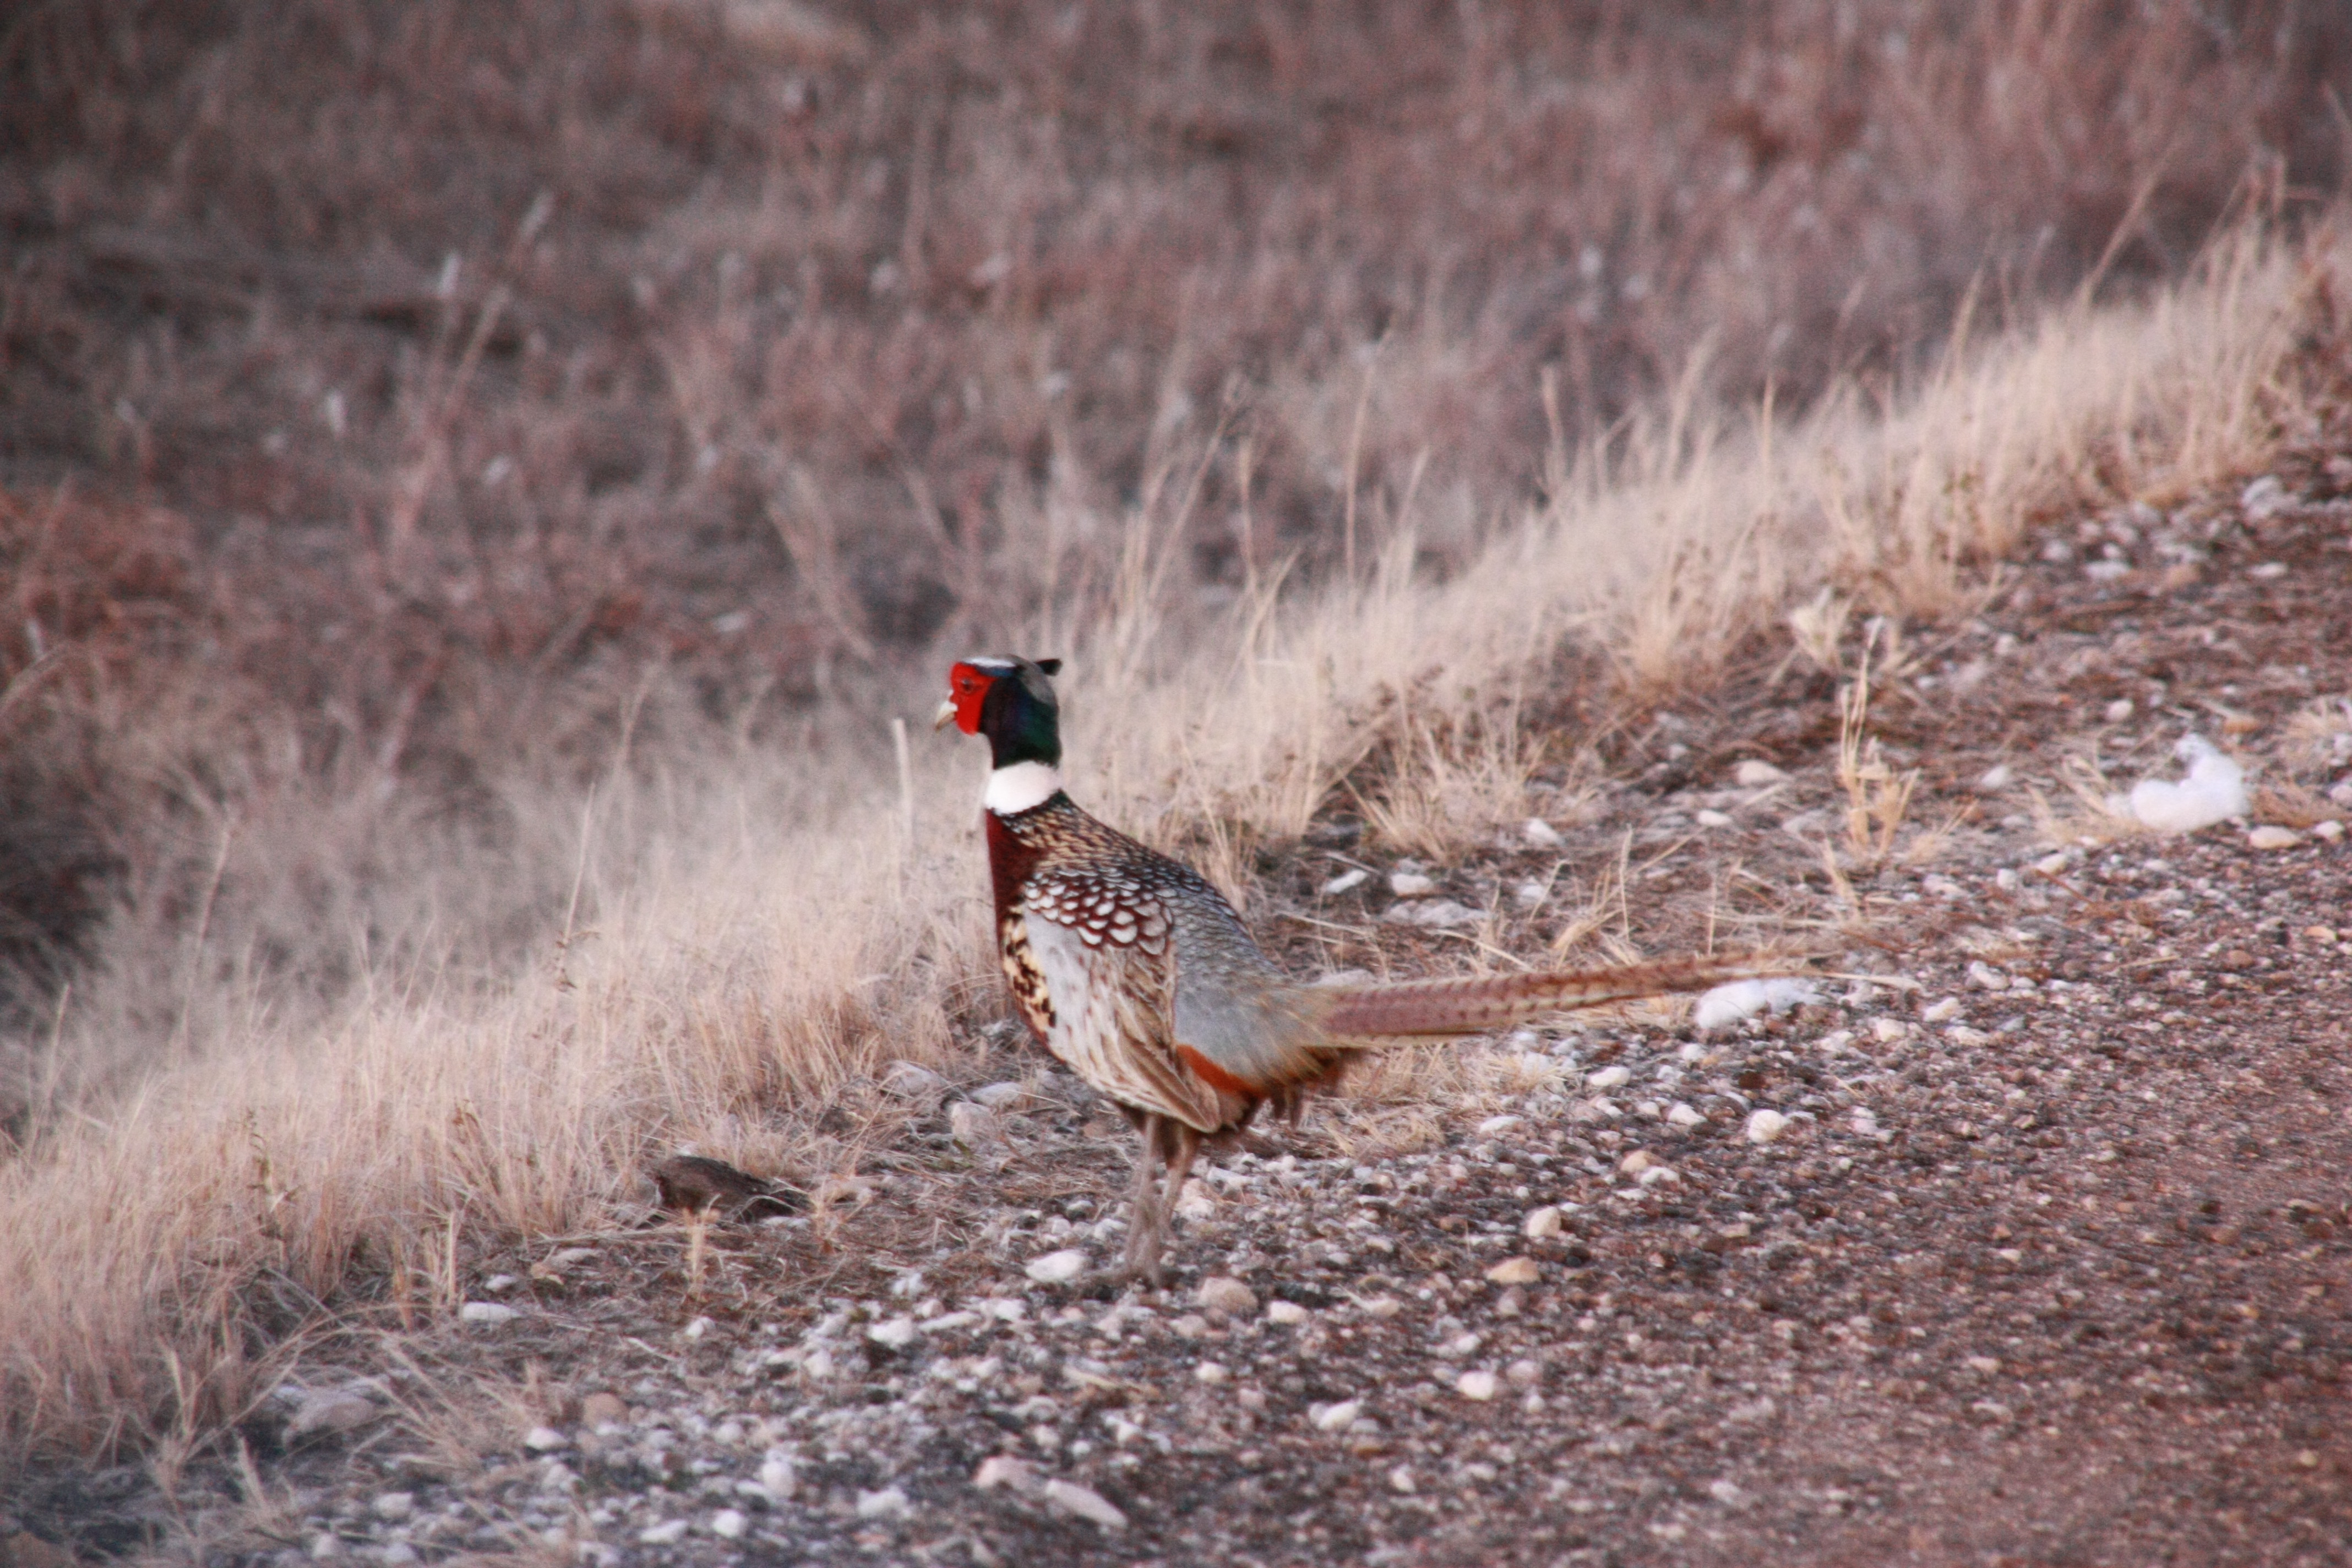 pheasant bird standing on rocky road with grass in background